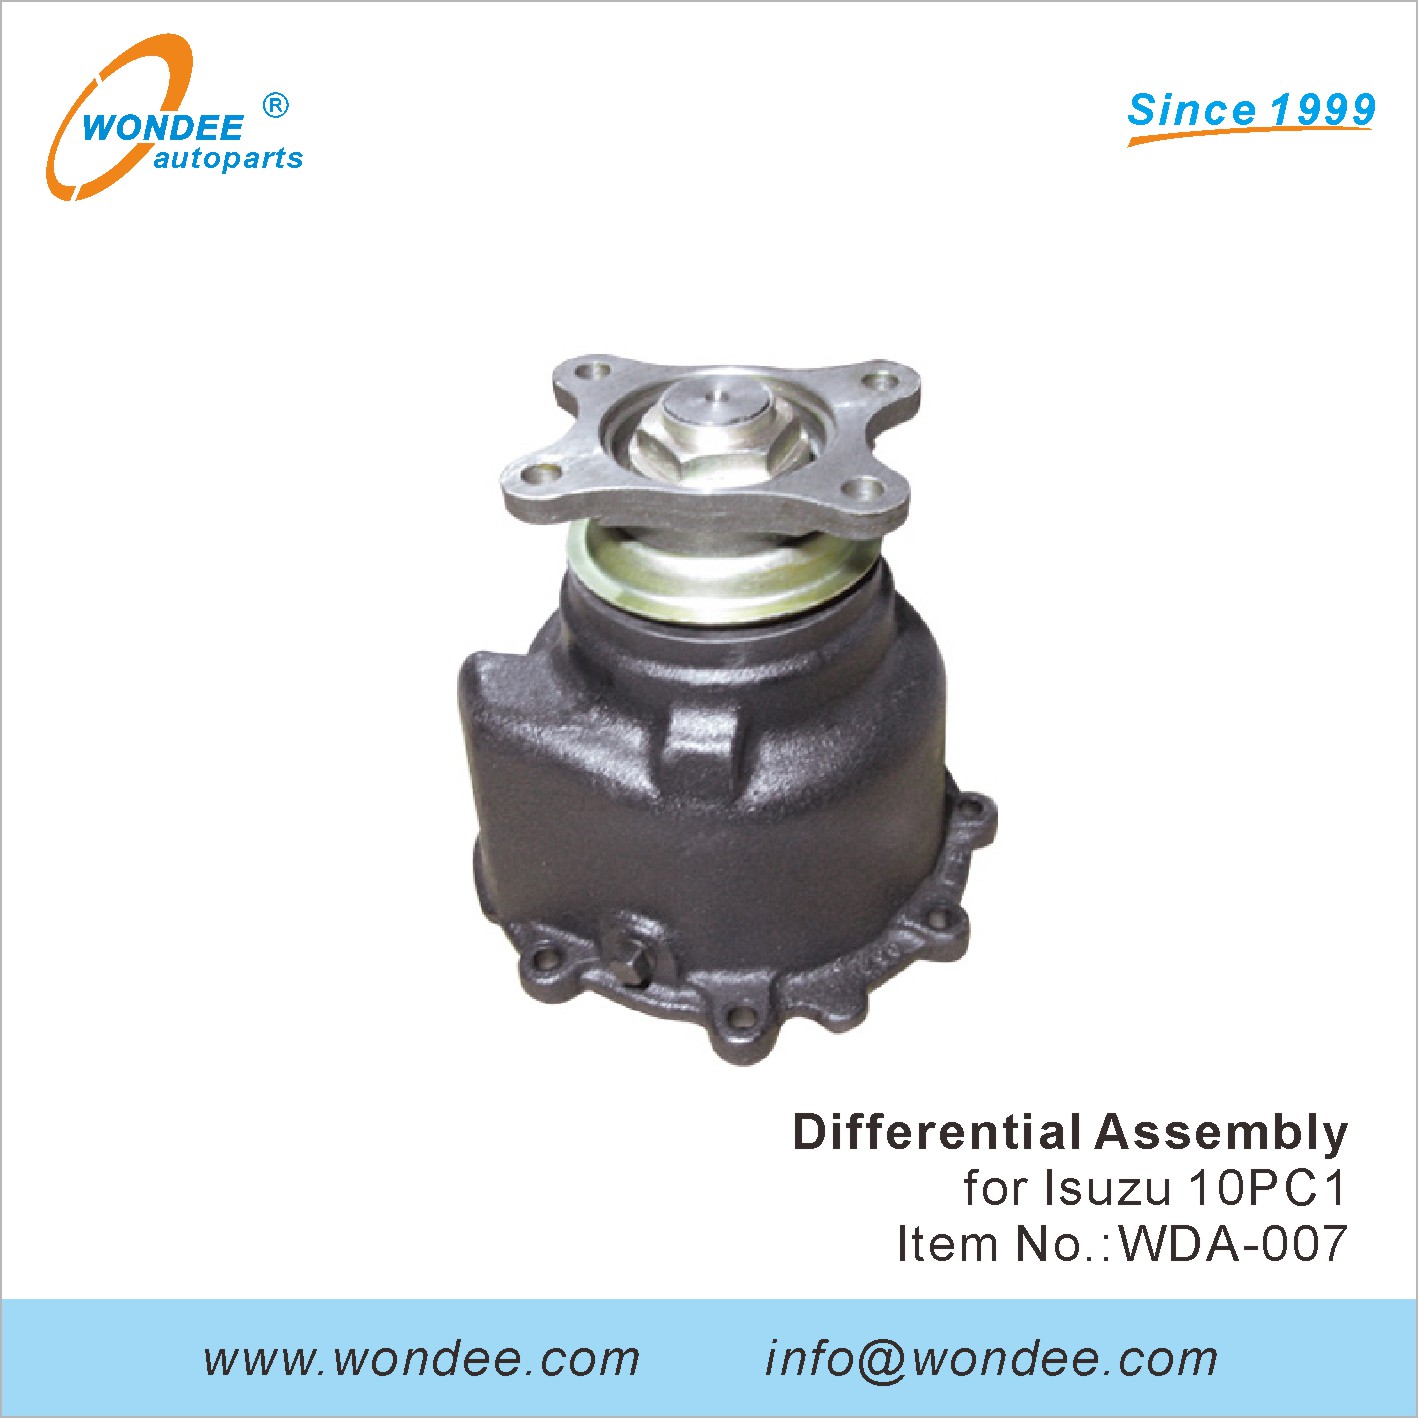 WONDEE differential assembly (7)